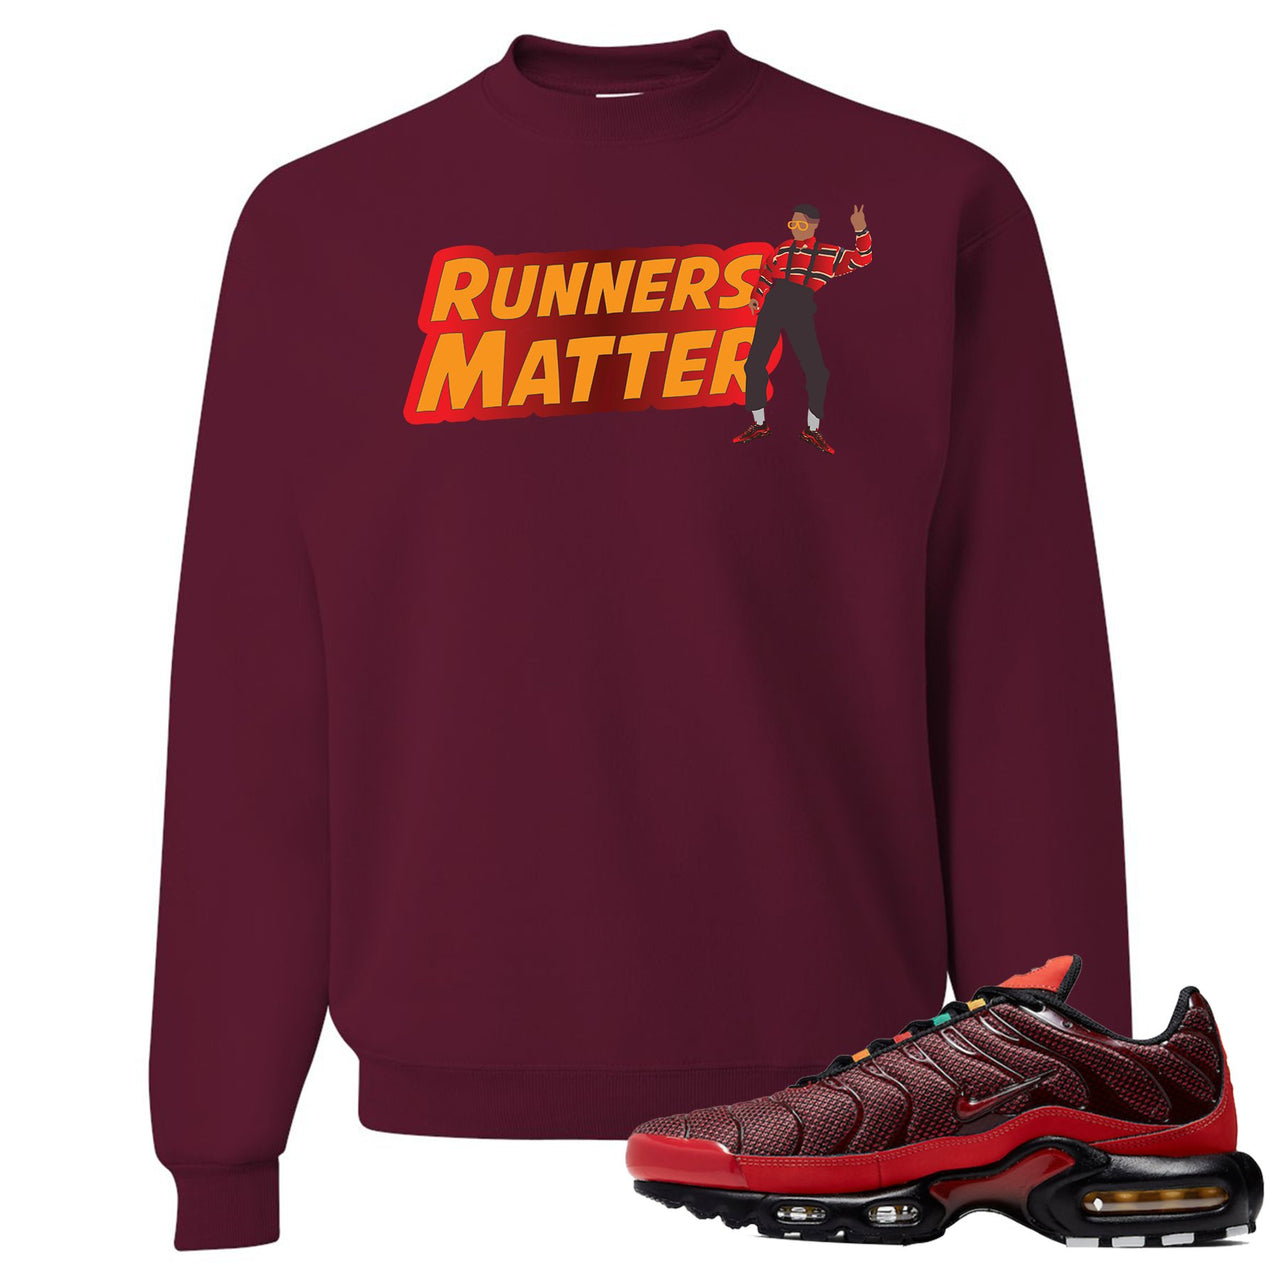 printed on the front of the air max plus sunburst sneaker matching maroon crewneck sweatshirt is the runners matter logo